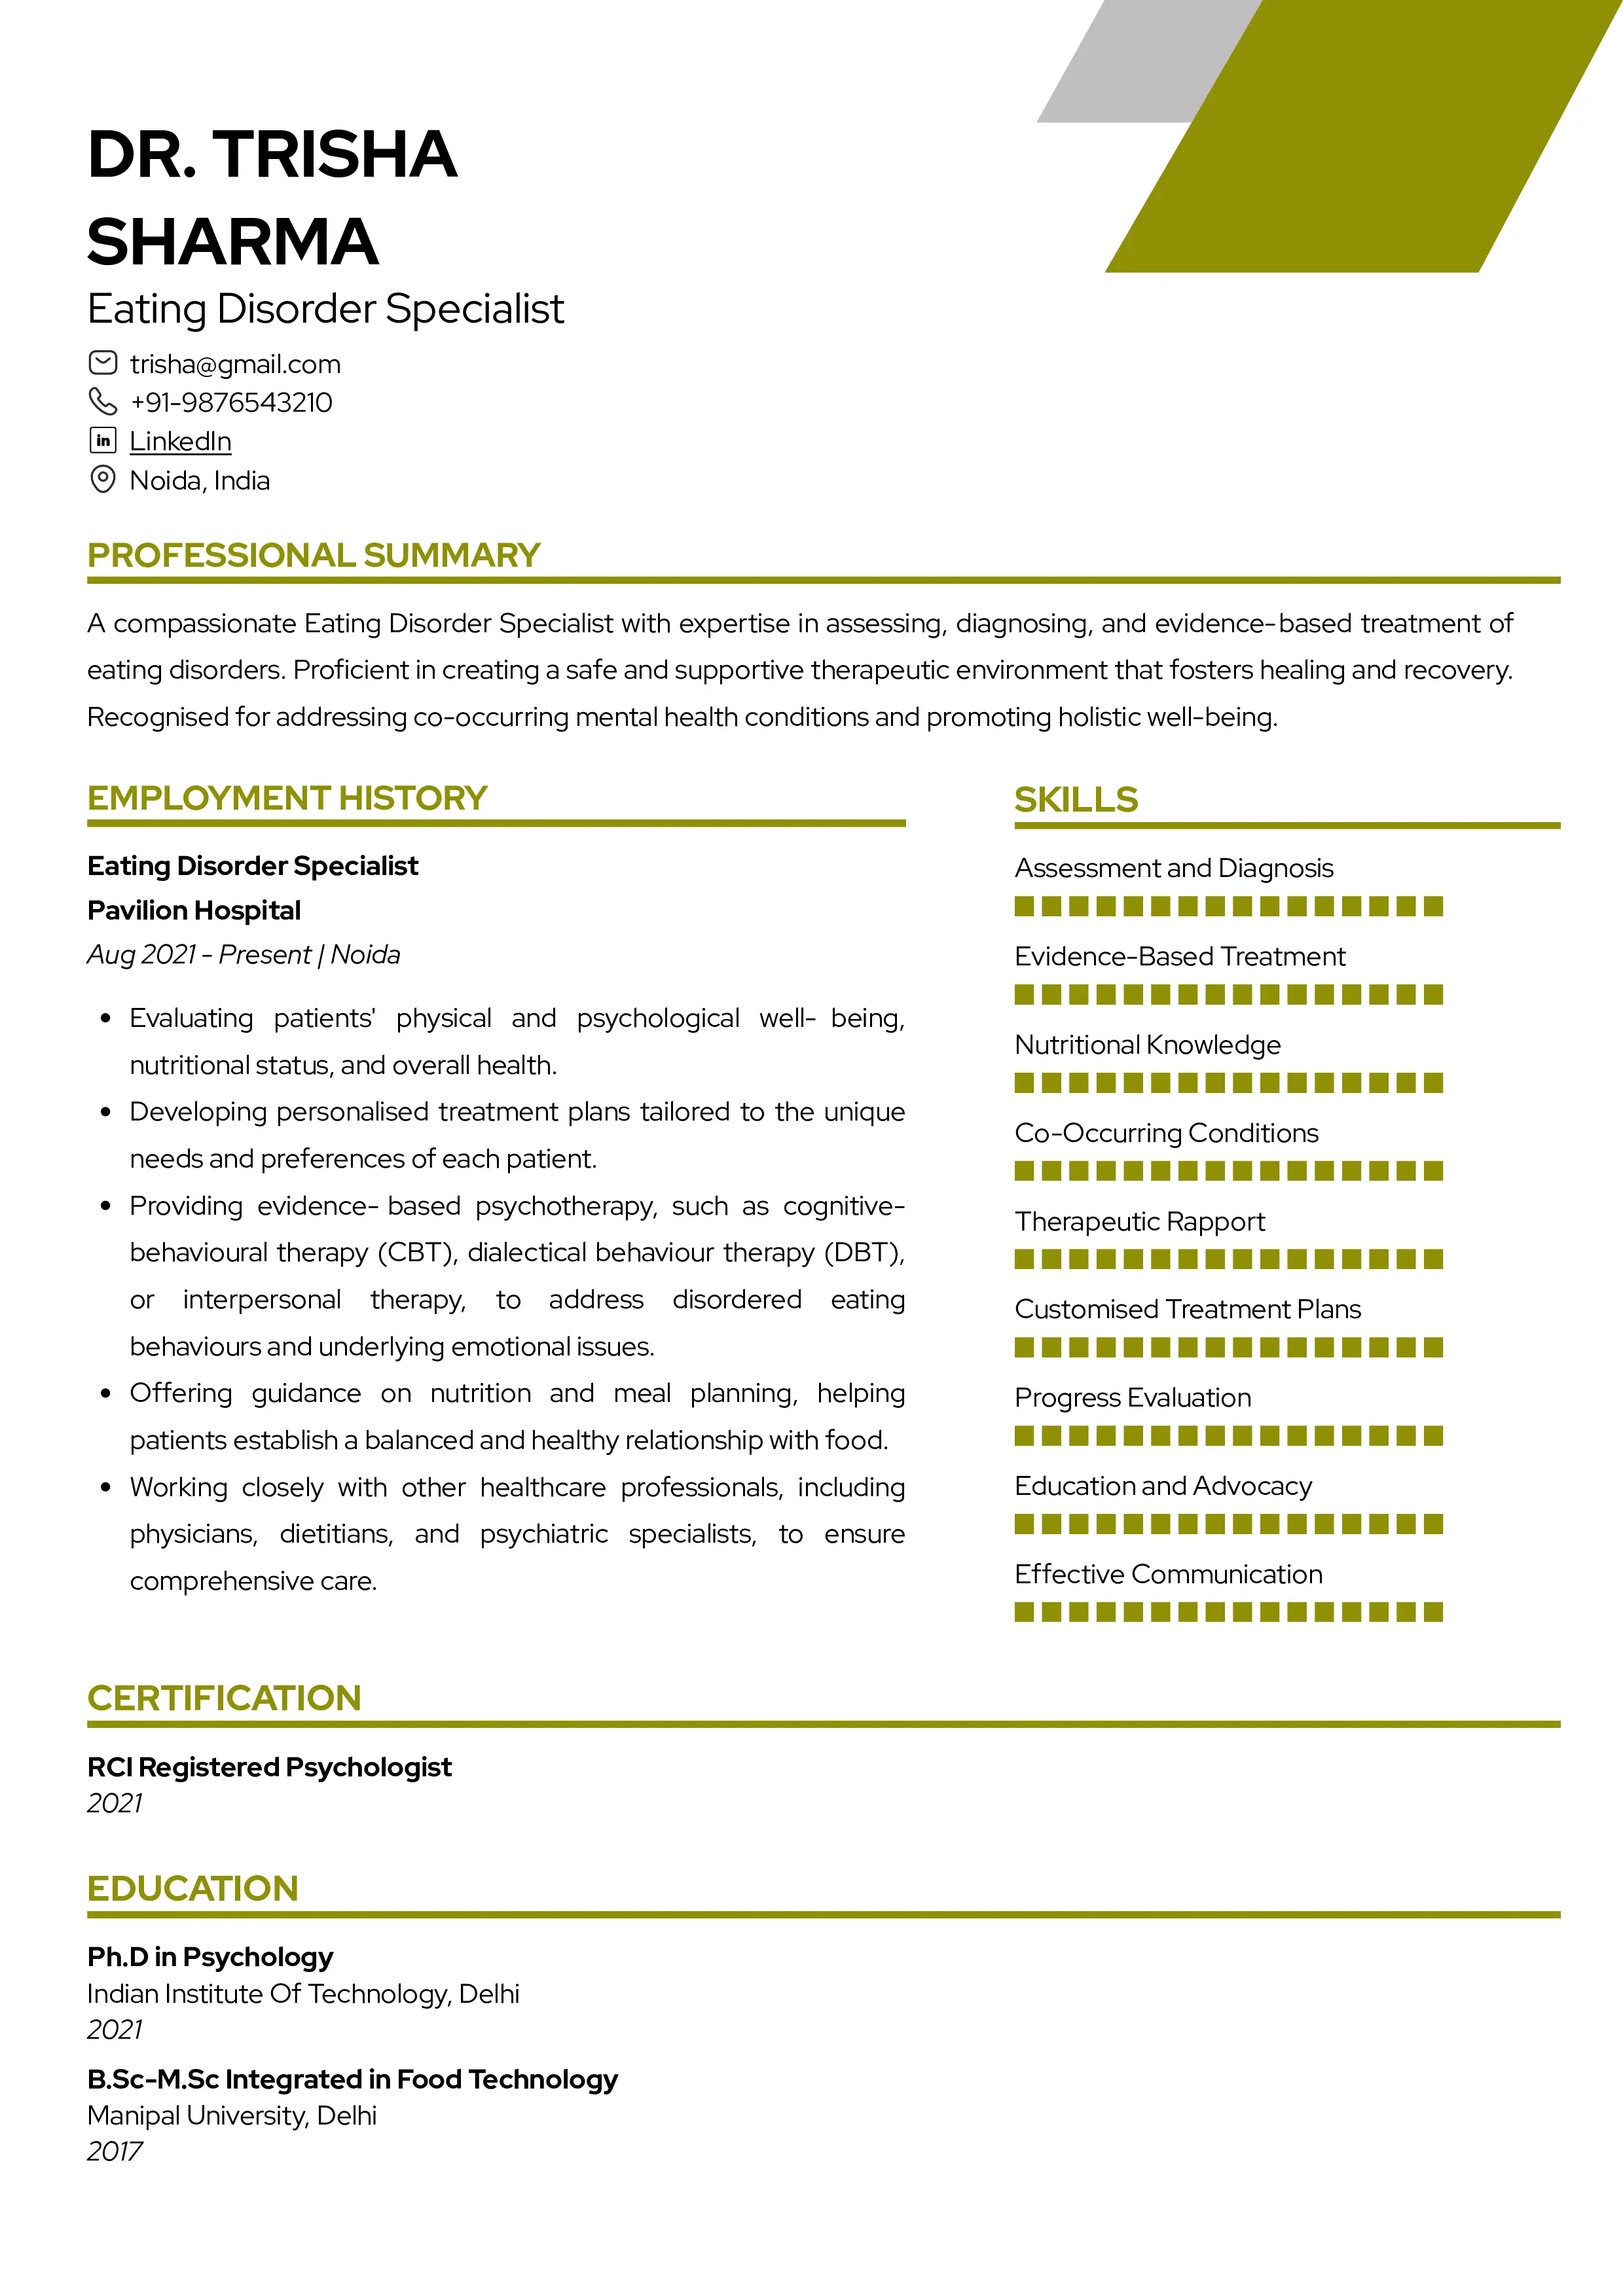 Sample Resume of Resume of Eating Disorder Specialist | Free Resume Templates & Samples on Resumod.co